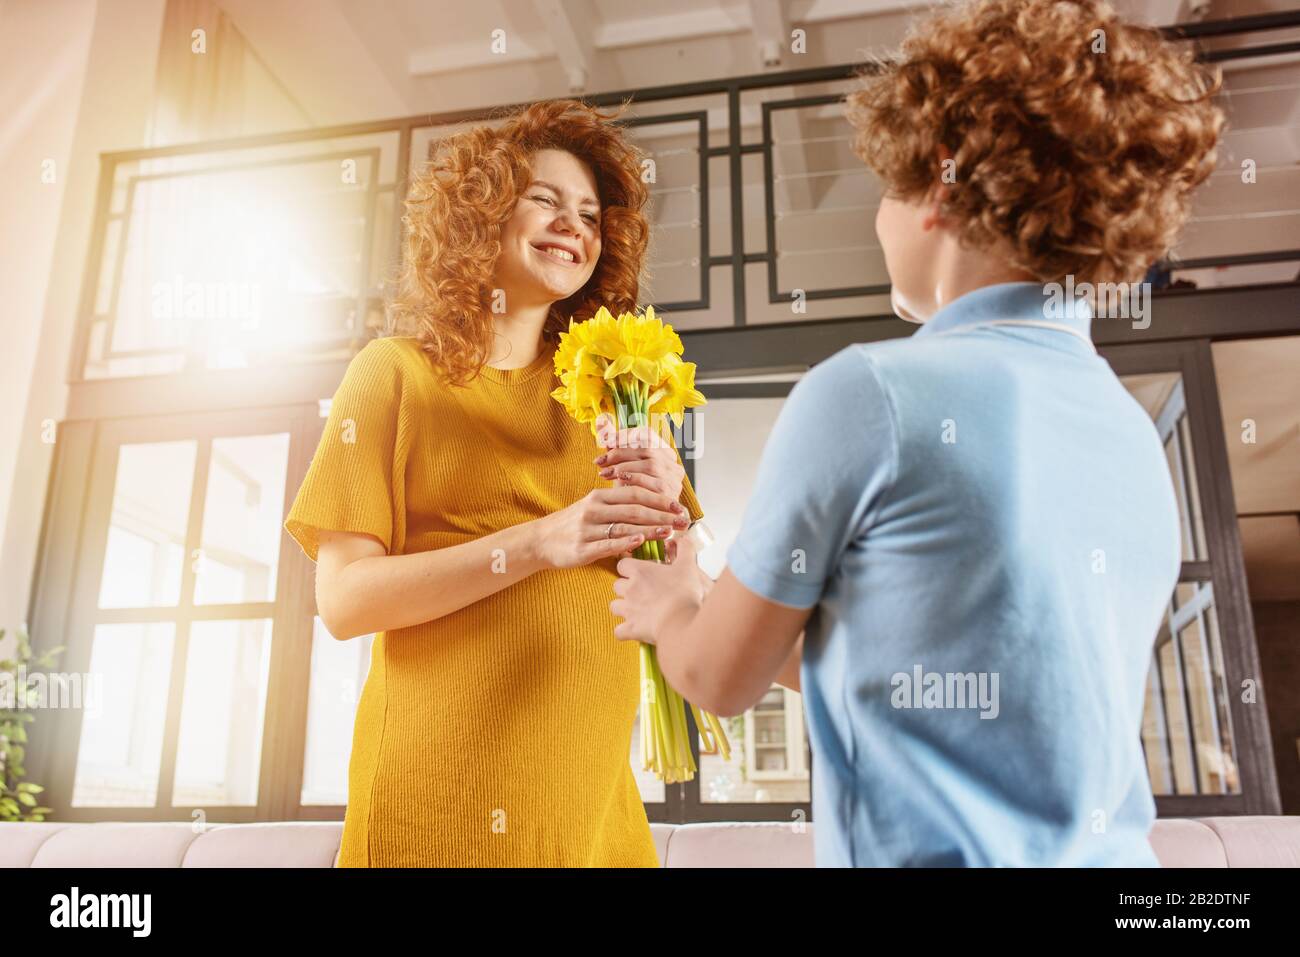 Mum receive flower as present from her son. Concept of mother day Stock Photo